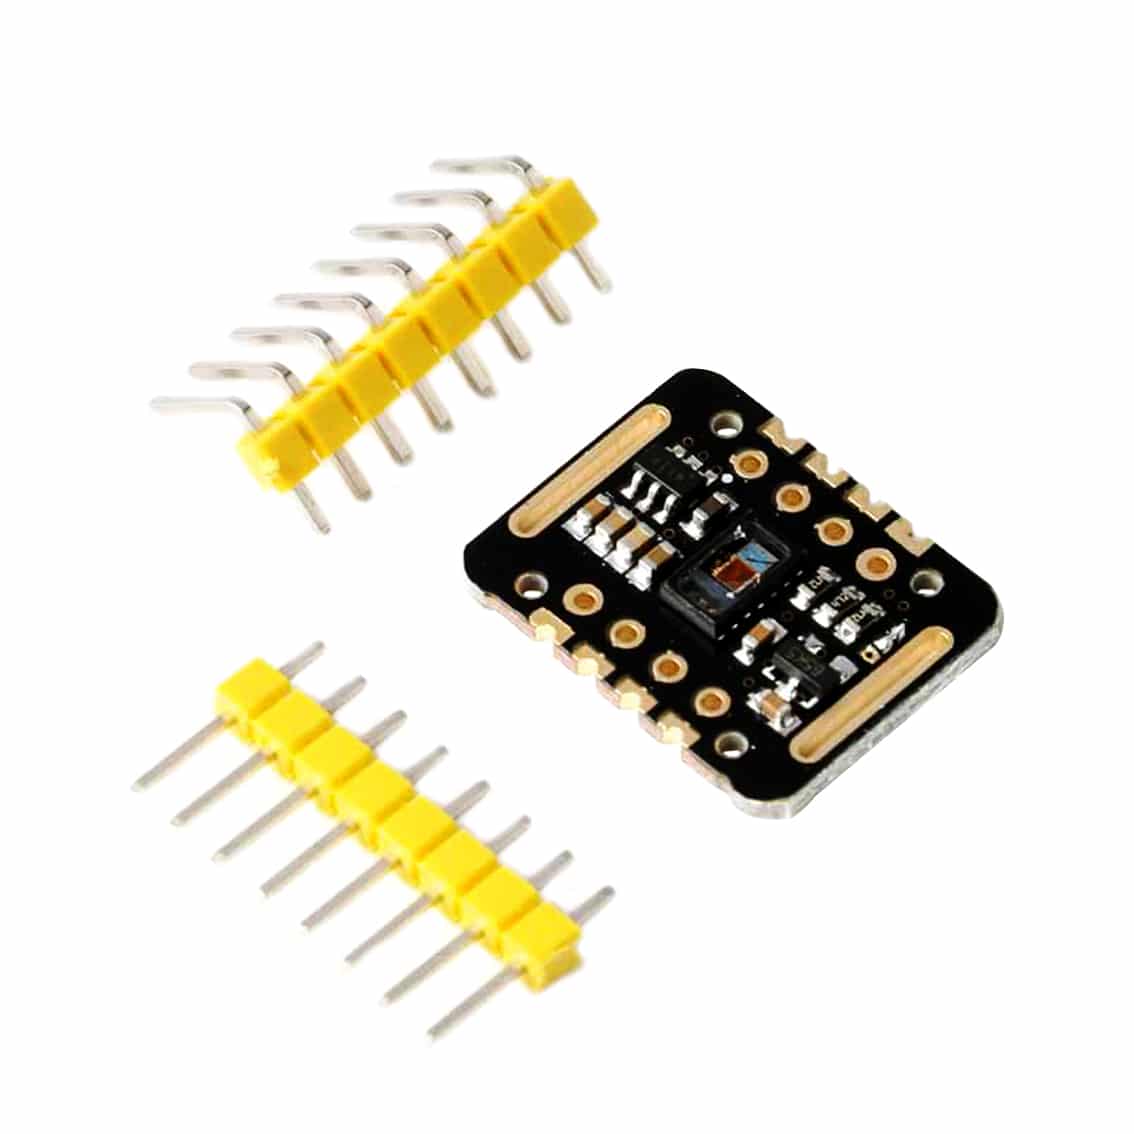 Ziihao 4PCS Heart Rate Sensor Module,MAX30102 Puls Detection Ultra-Low Power,Pulse Development Board Sensor Module for Wearable Health Fitness Assistant Devices Medical Monitoring Device 